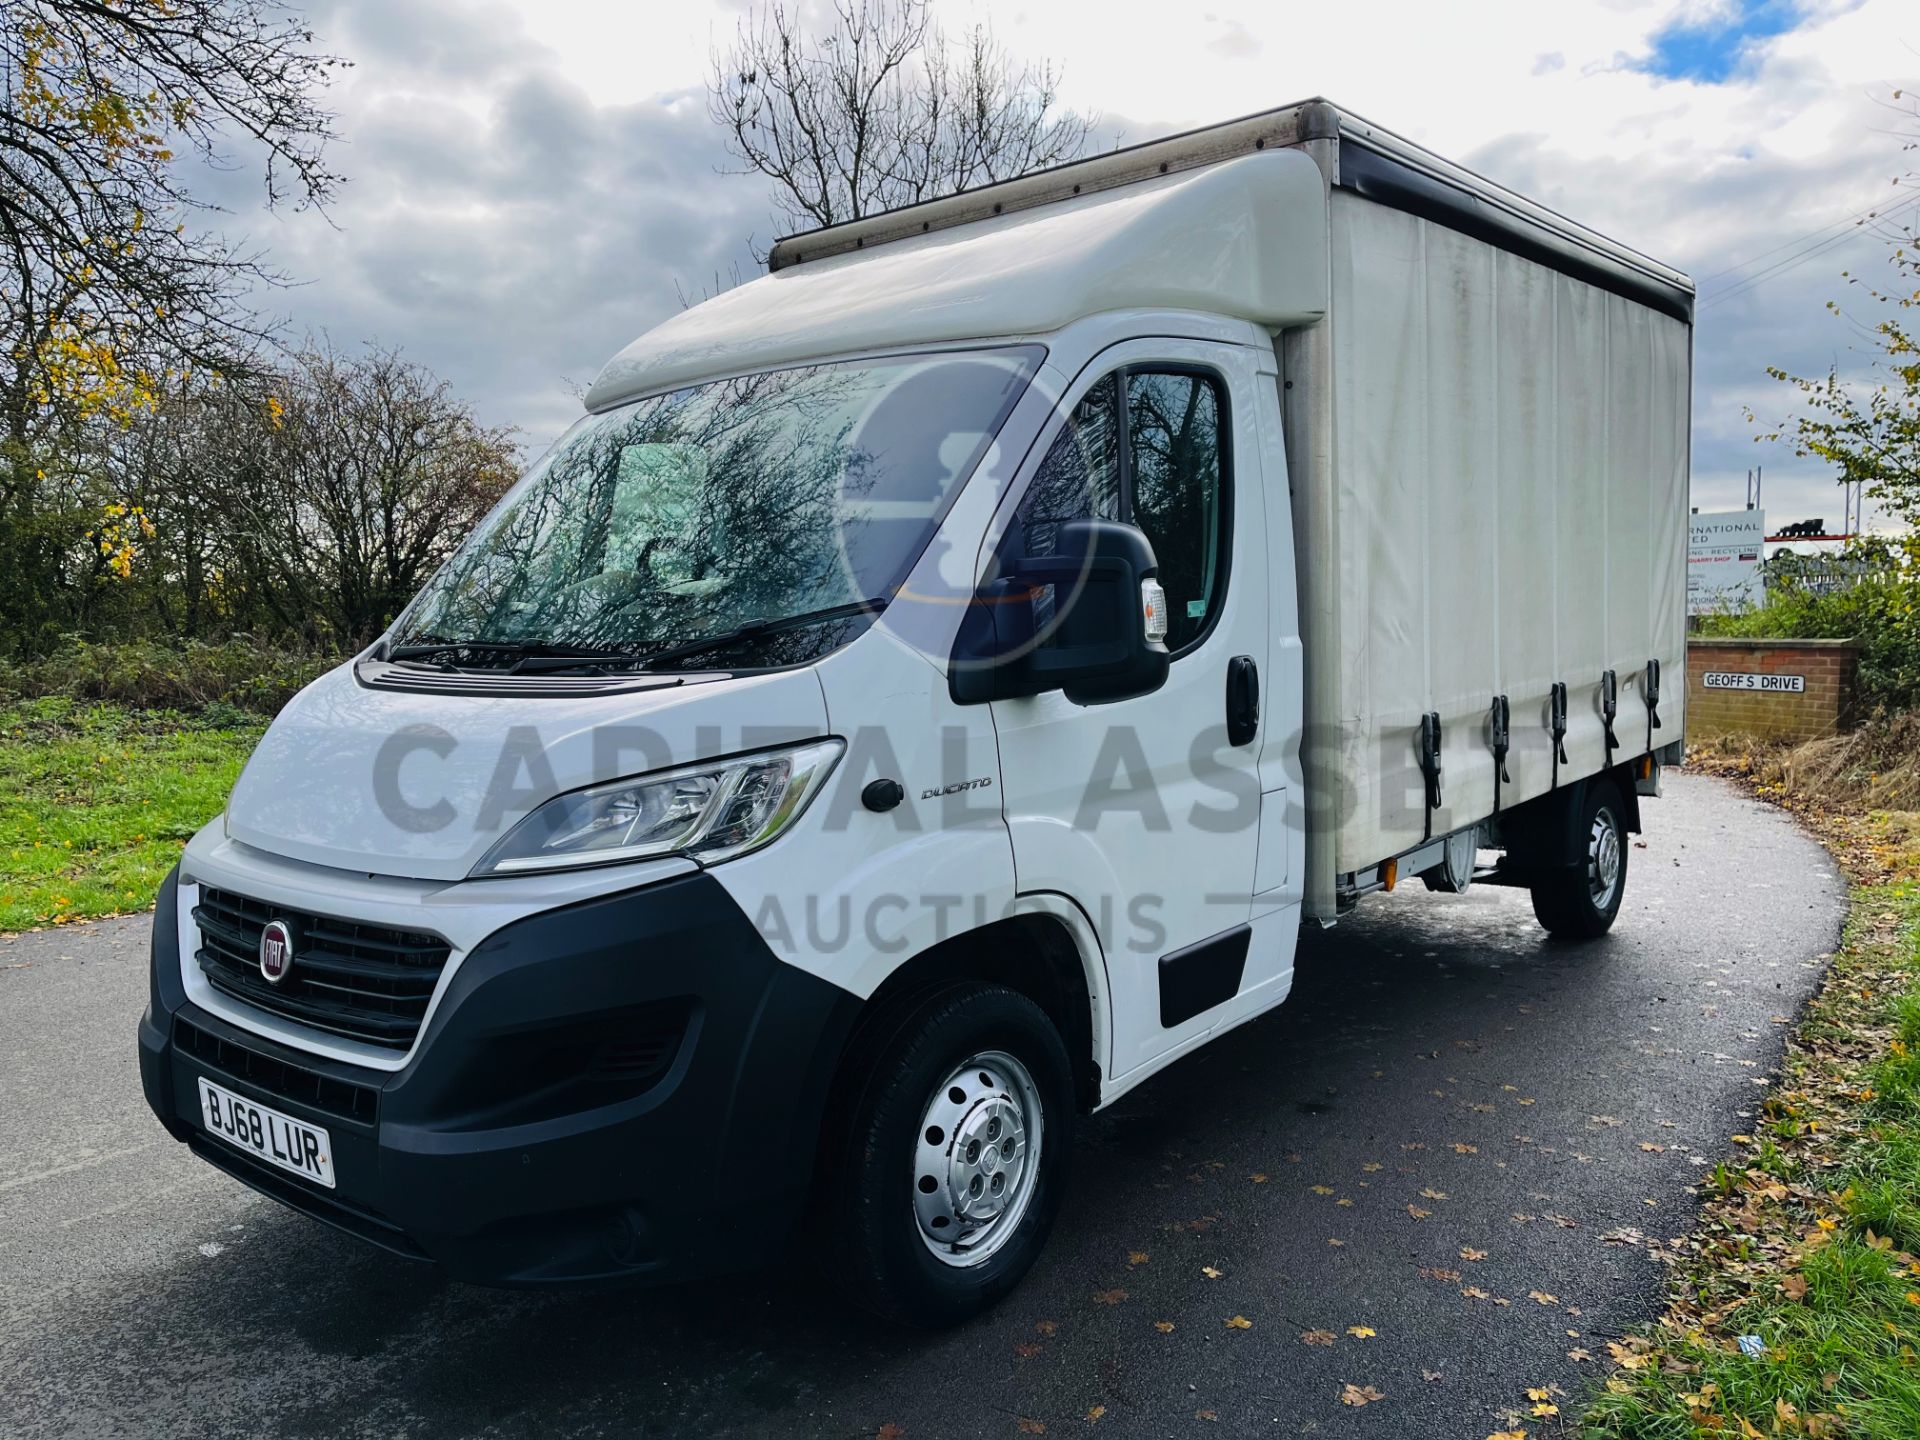 (ON SALE) FIAT DUCATO 2.3 MULTIJET (2019 MODEL) RARE CURTAIN SIDE BODY - 1 OWNER - 360 CAMERA VIEW - Image 5 of 24